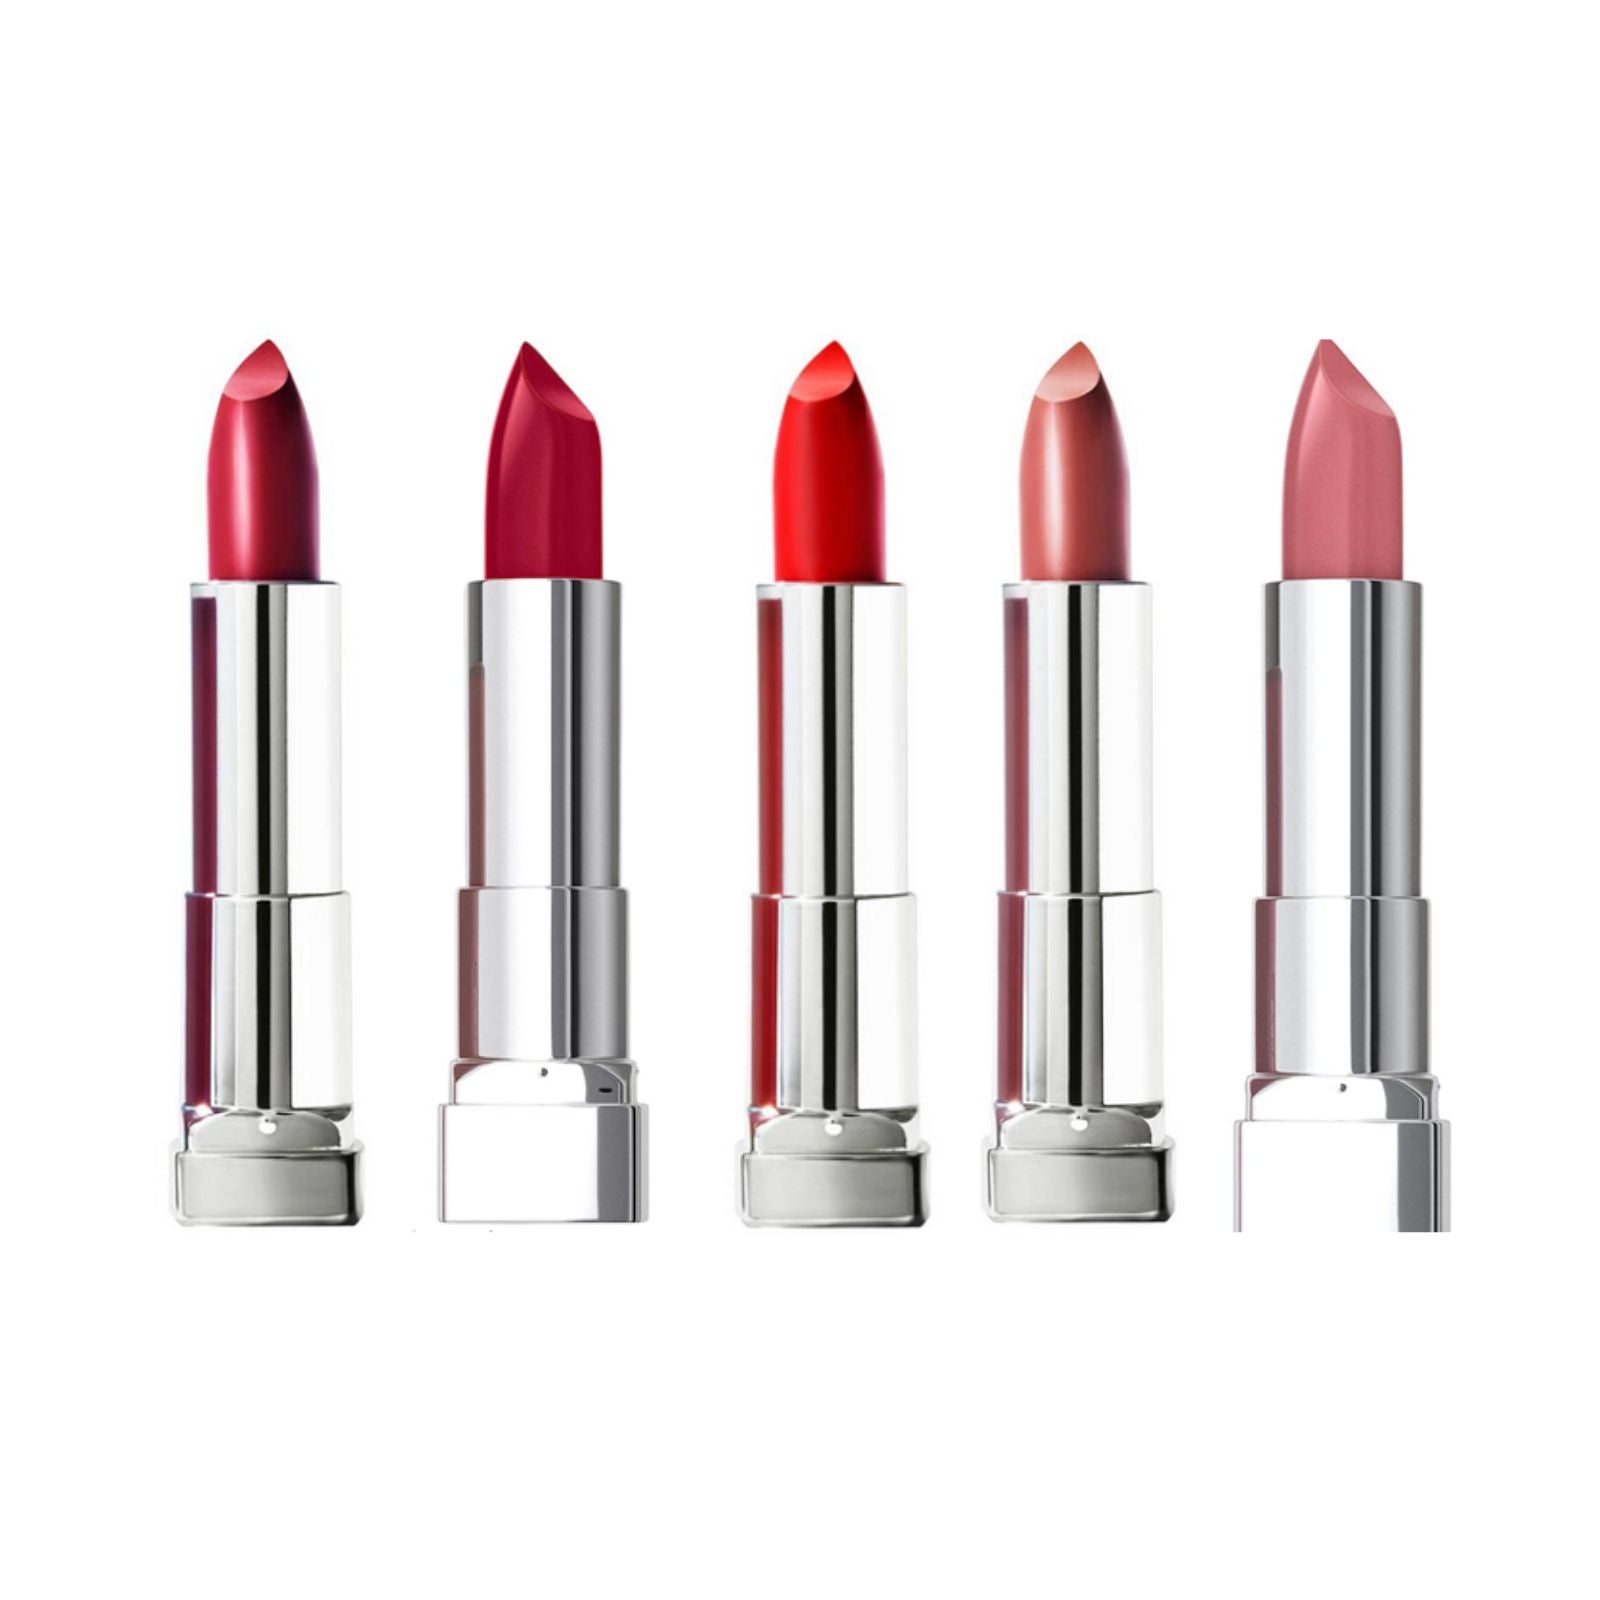 Maybelline Lipstick: Striking Color, Hydrating Anytime Makeup Long-lasting – 